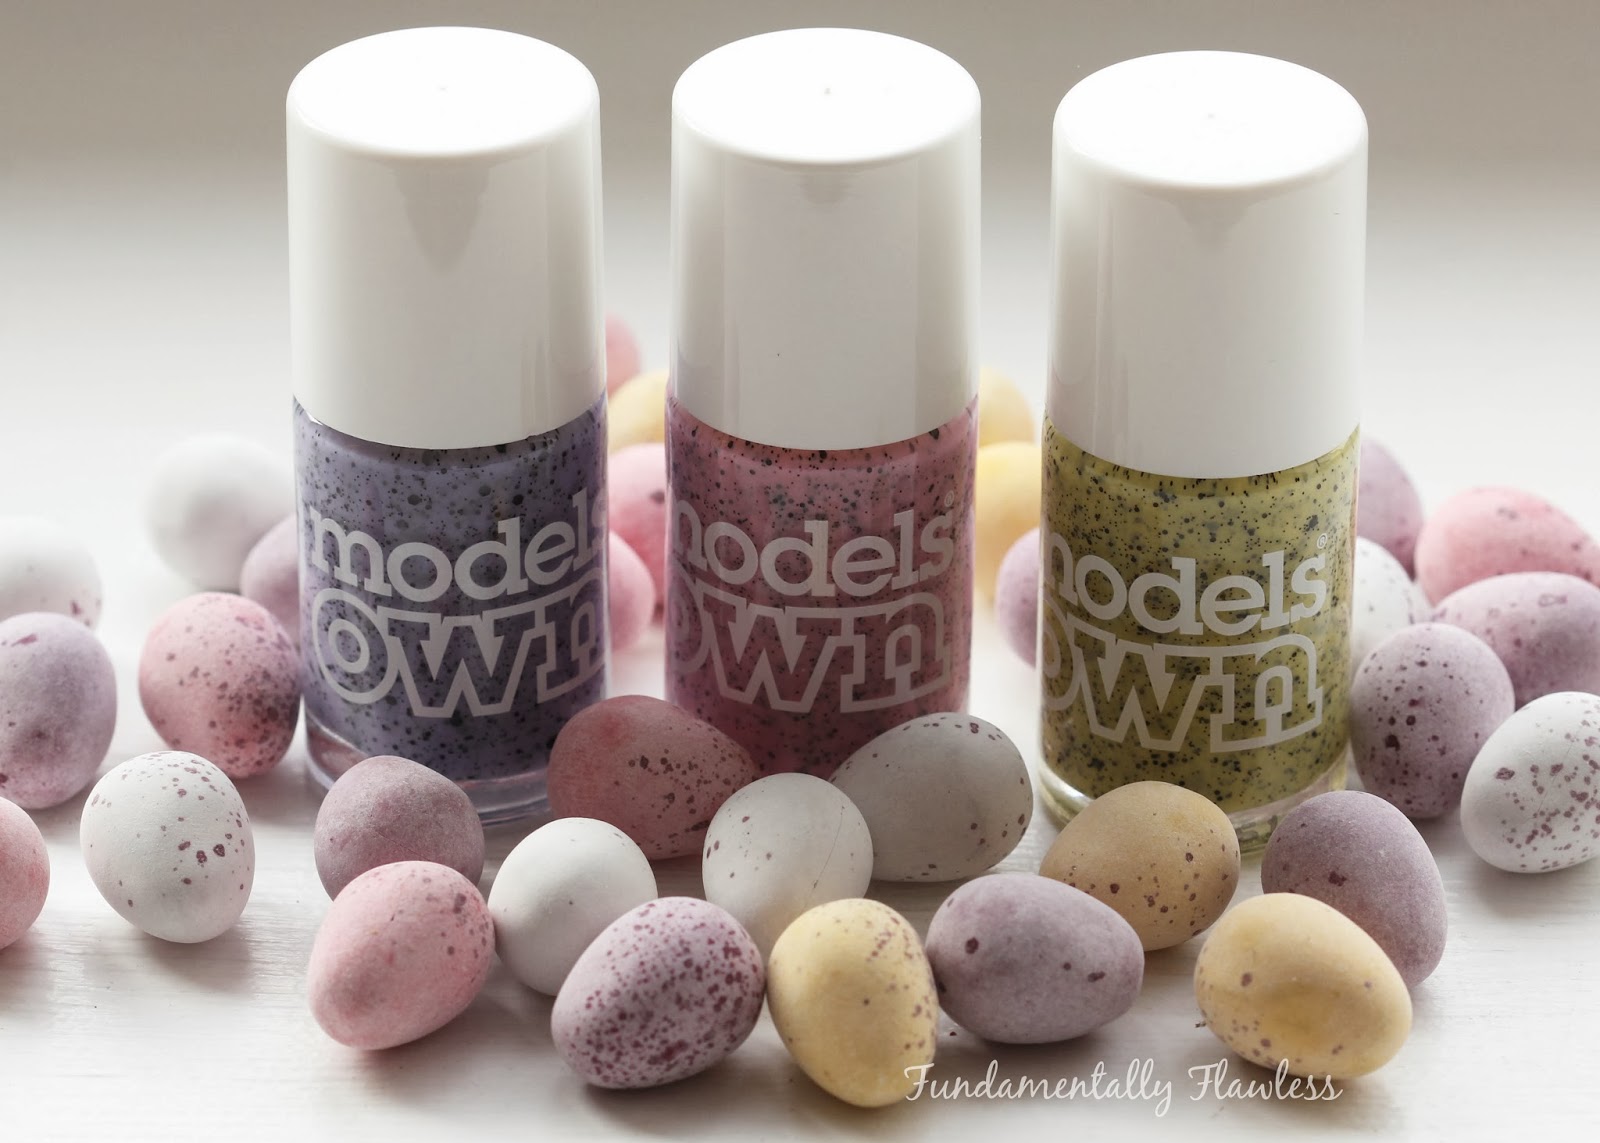 Models Own Speckled Eggs Collection